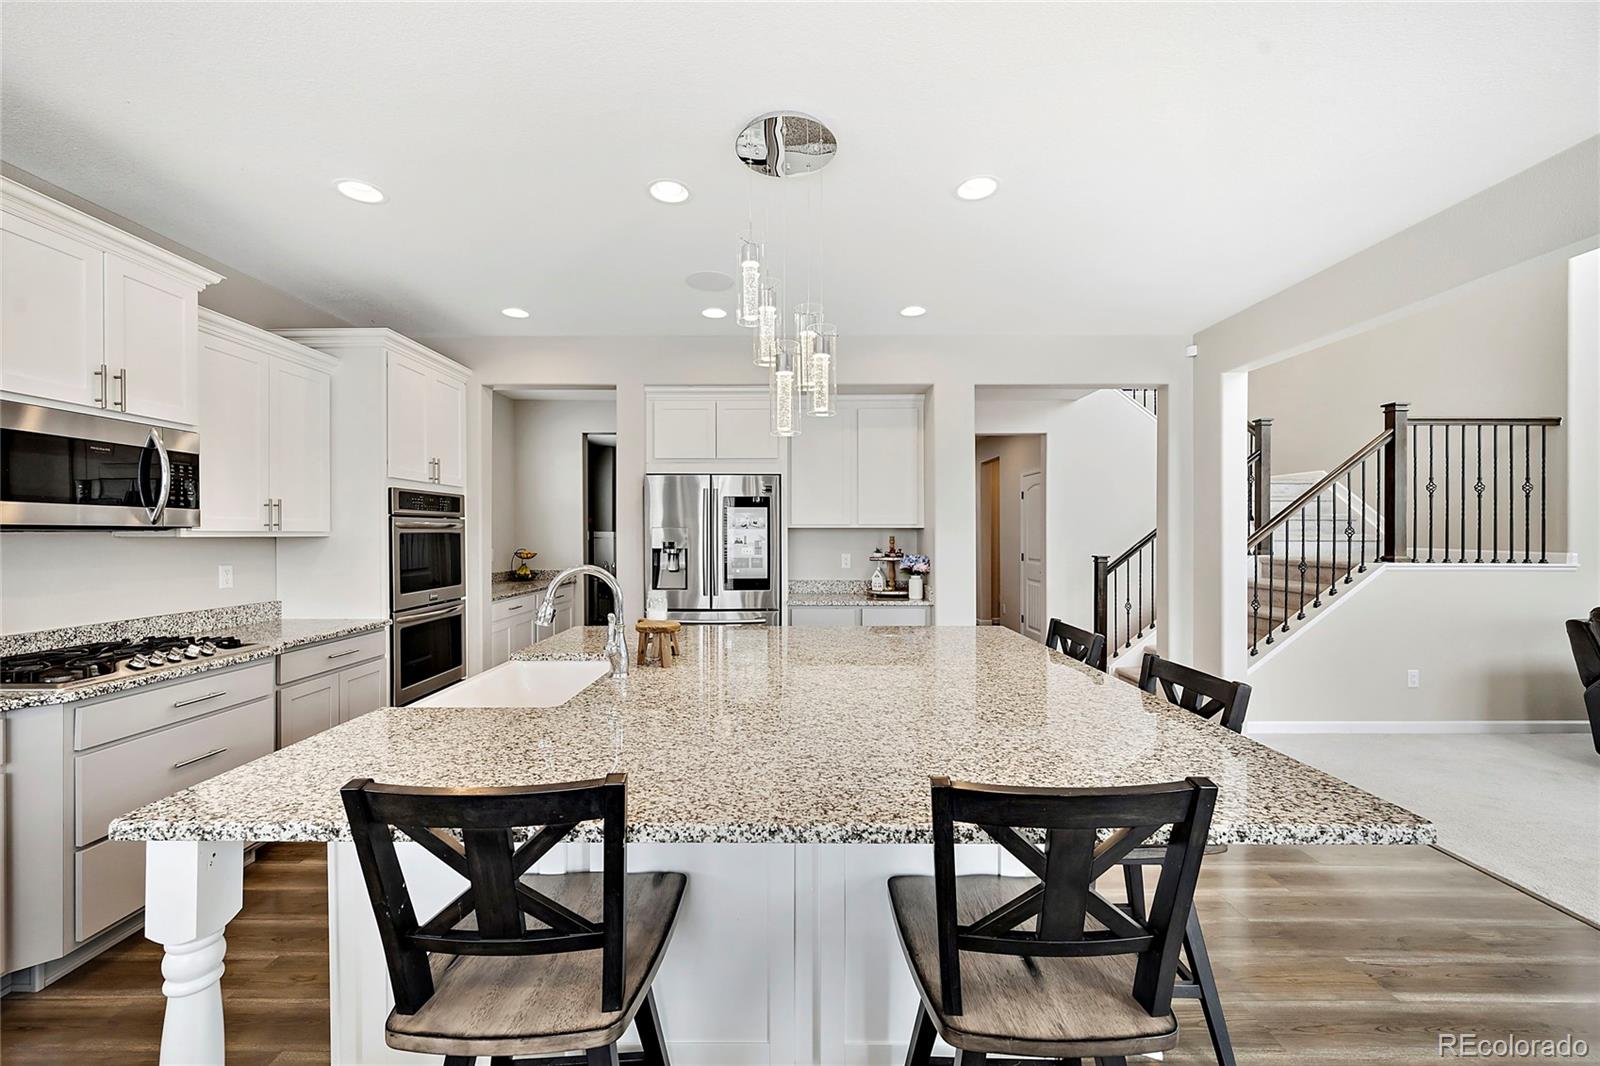 a kitchen with stainless steel appliances kitchen island granite countertop a dining table chairs and stove